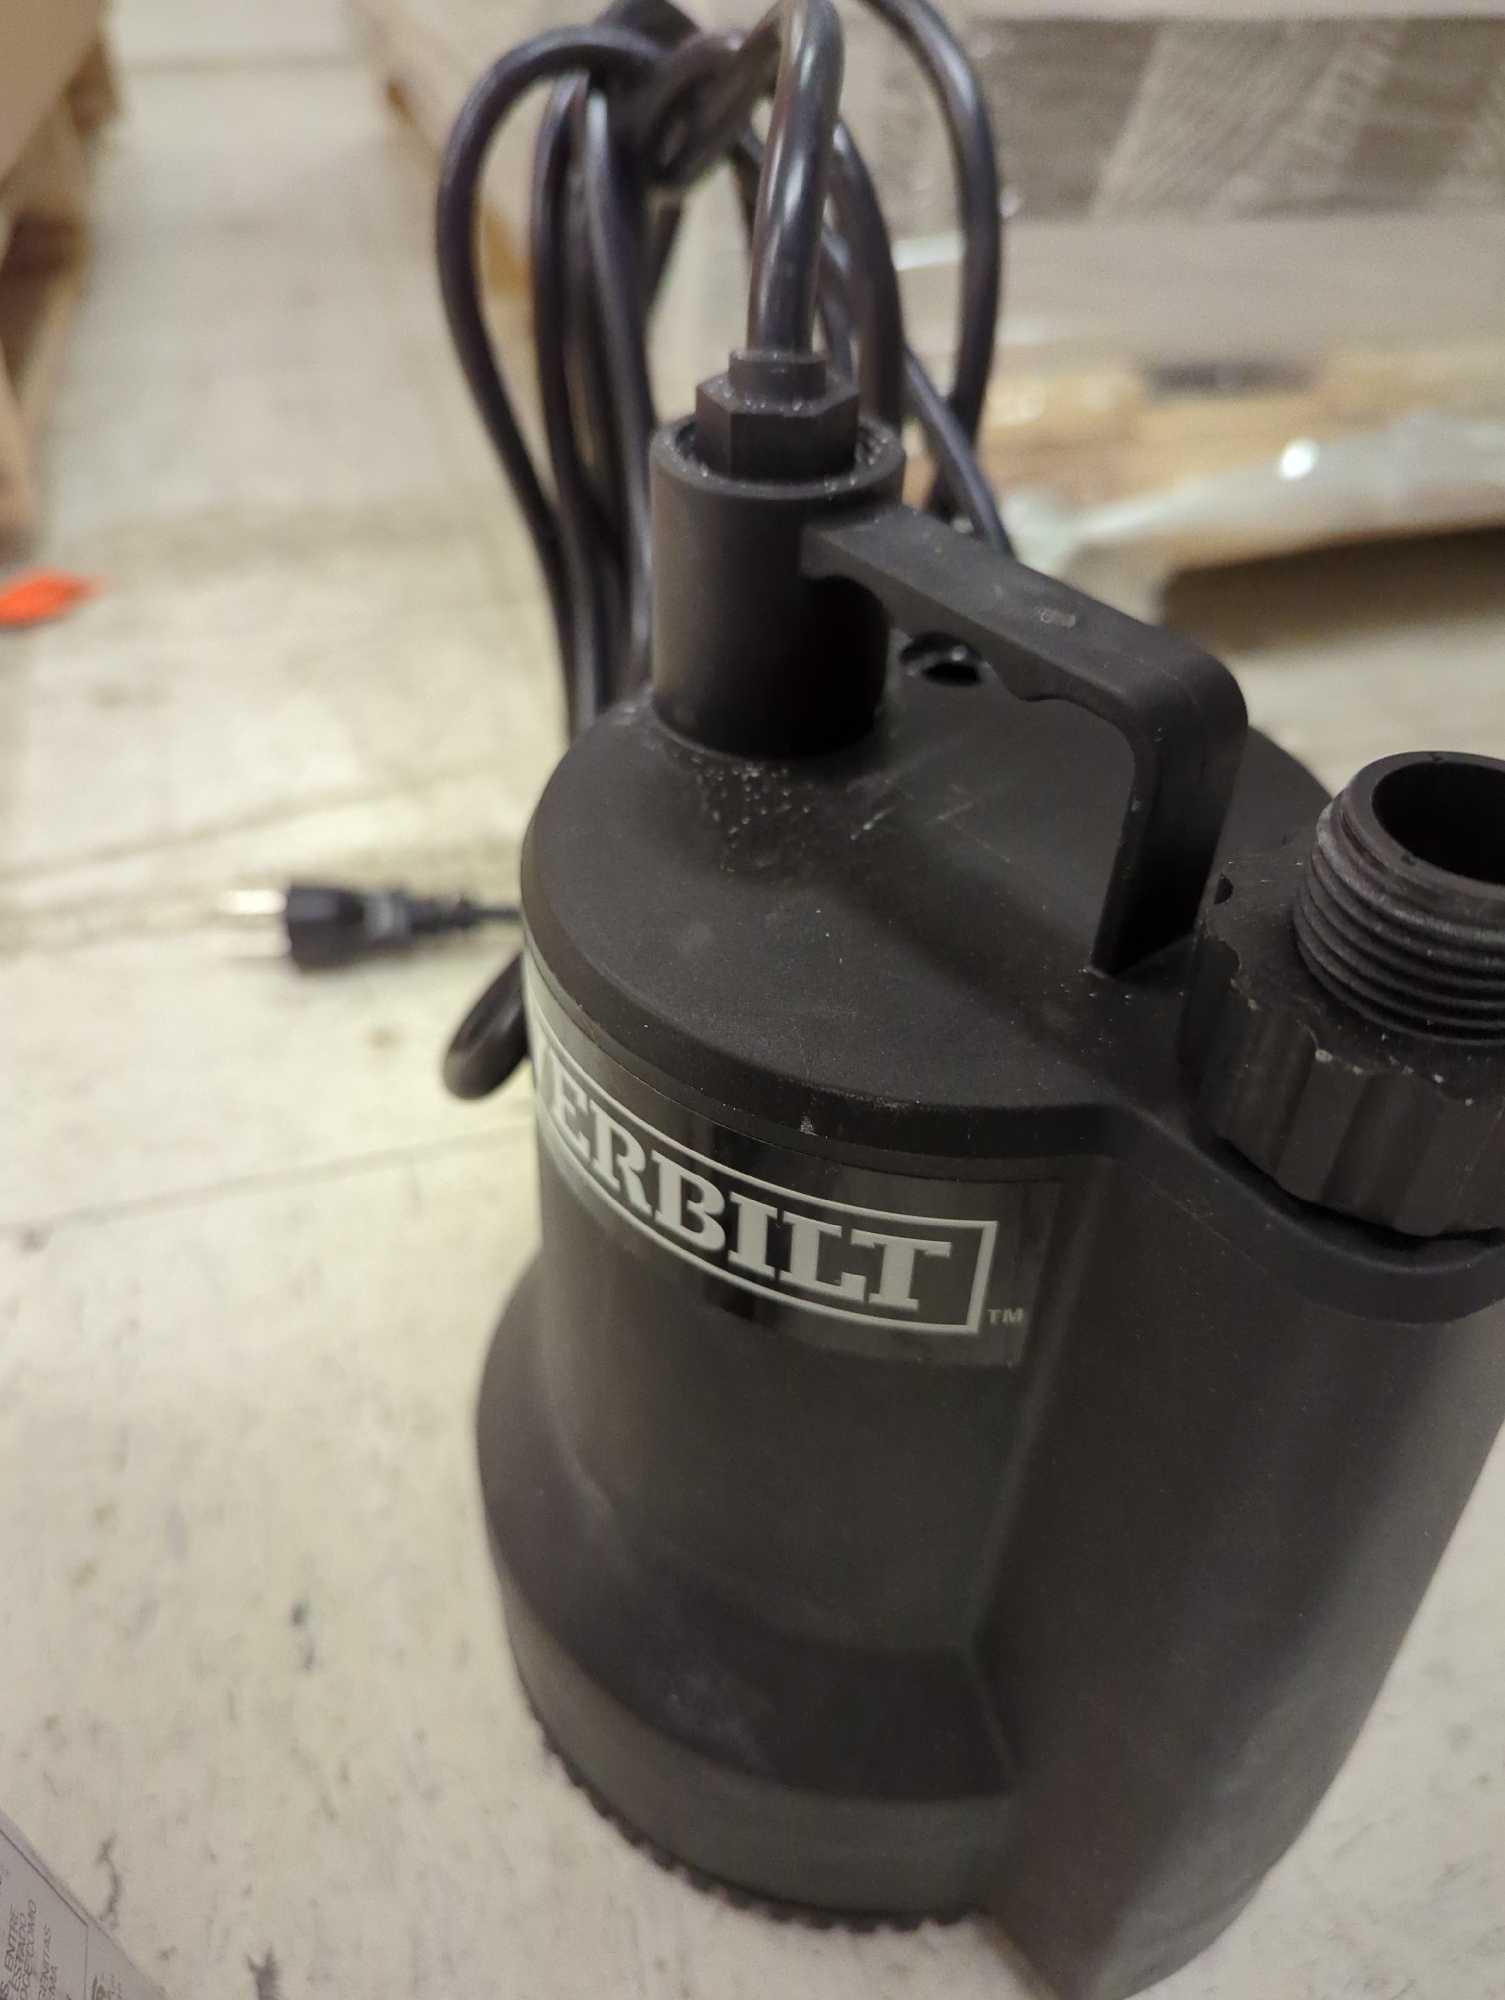 Everbilt 1/6 HP Plastic Submersible Utility Pump, Appears to be Used in Open Box Retail Price Value